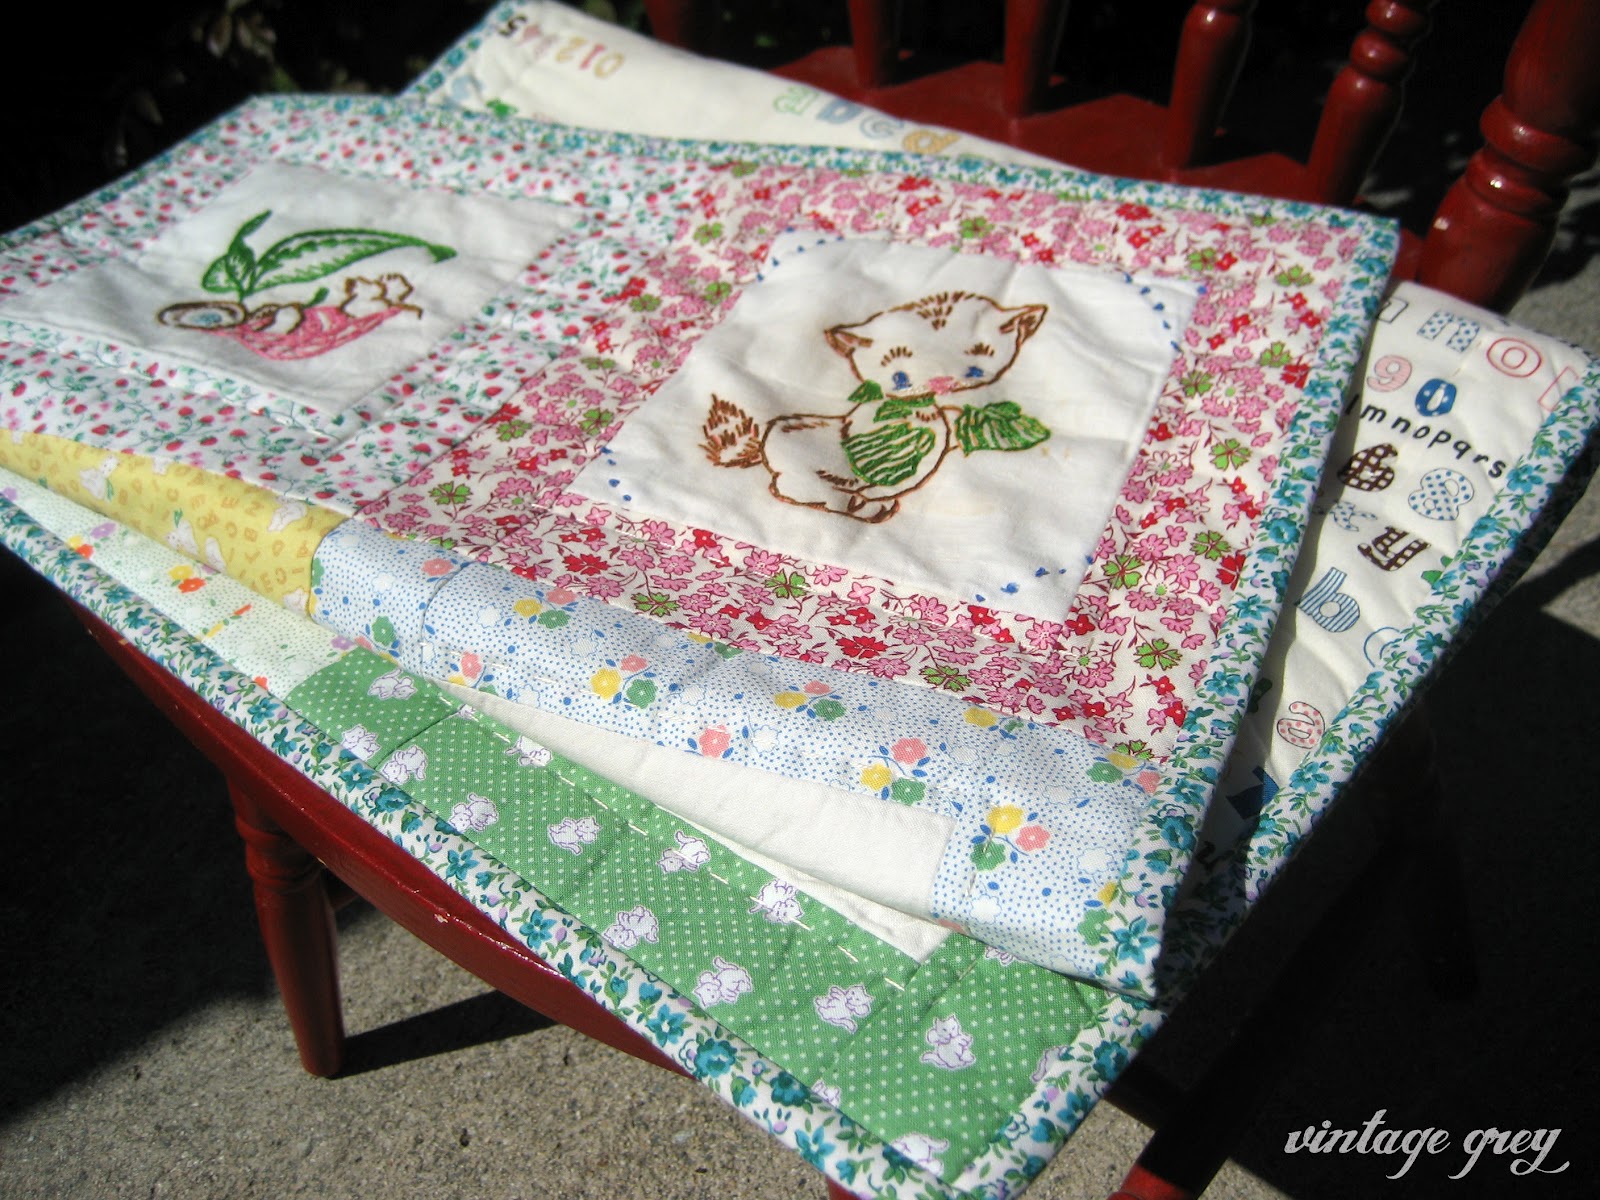 vintage grey: vintage quilt and sweet gifts